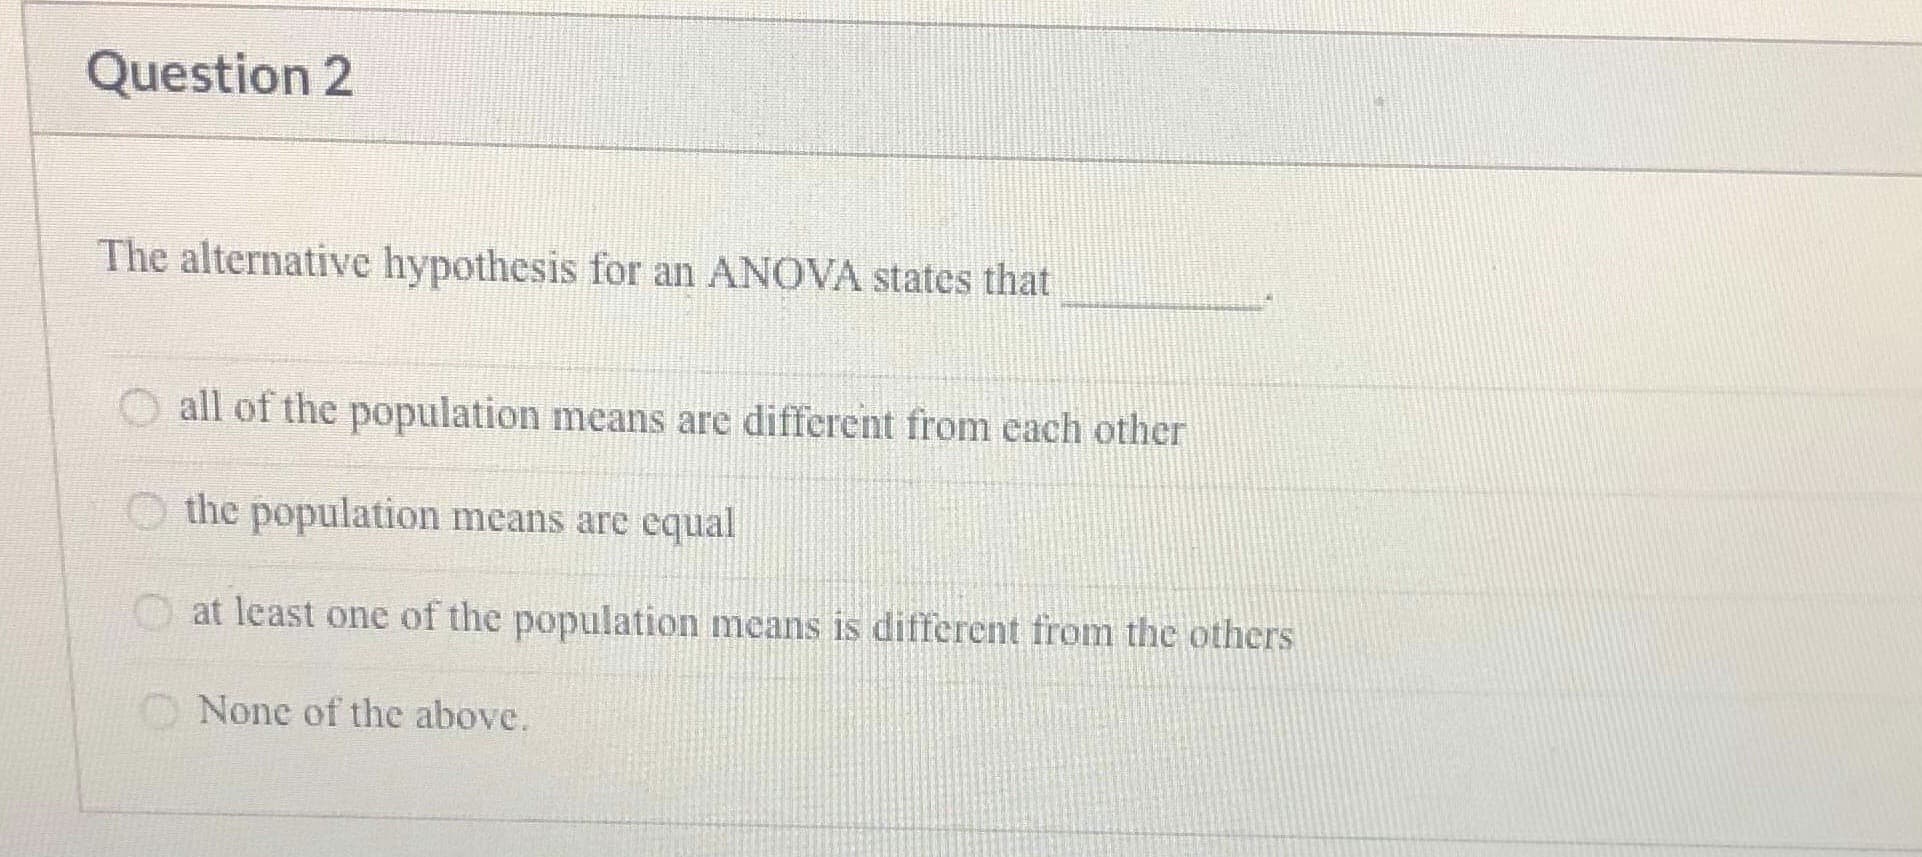 The alternative hypothesis for an ANOVA states that
